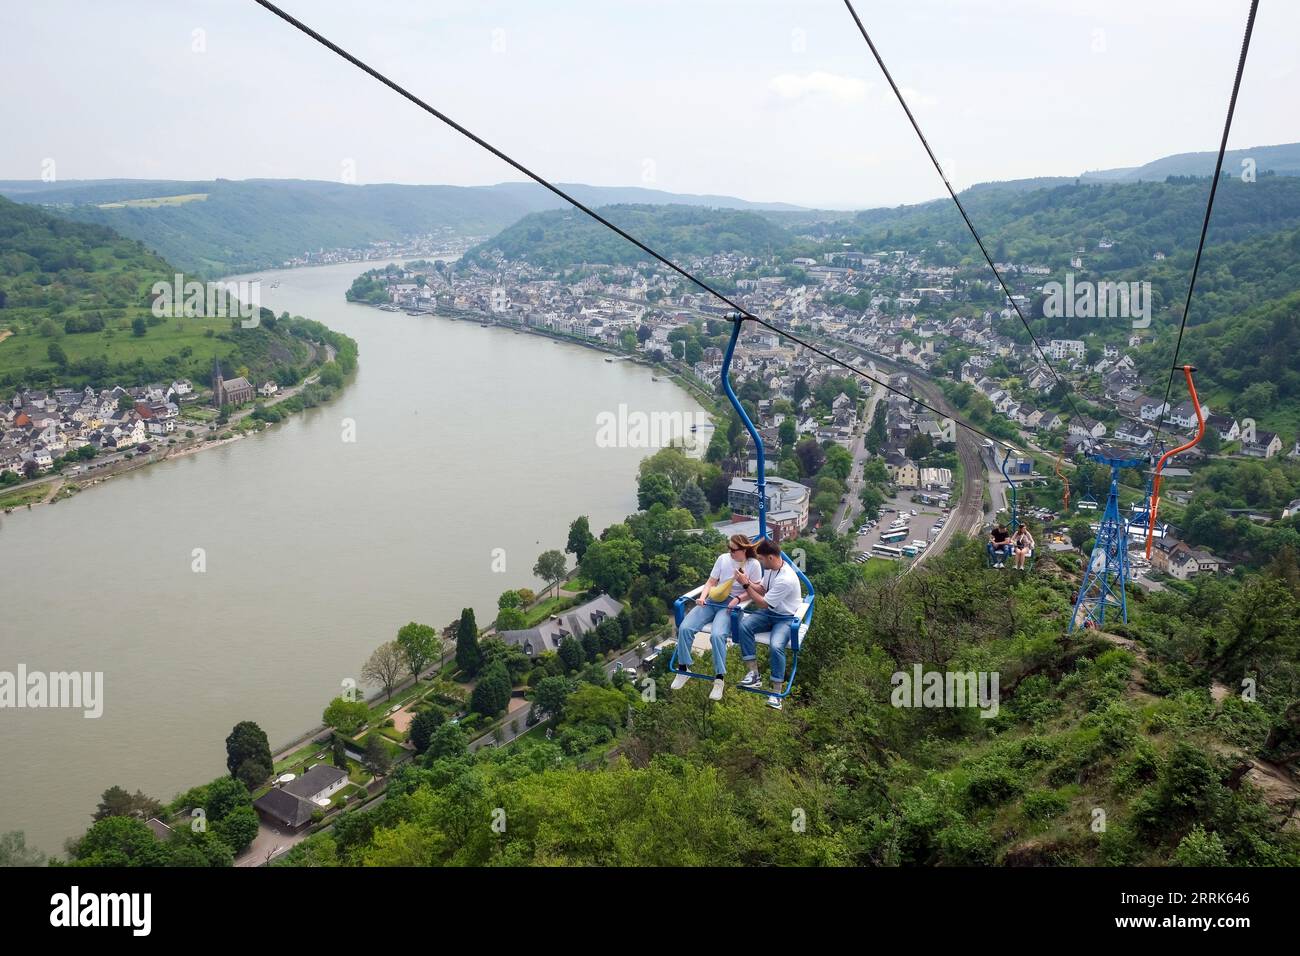 Boppard, Rhineland-Palatinate, Germany - Rhine landscape near Boppard. The Boppard chairlift is a 915 meter long two-seater chairlift built in 1954. Its destination is the viewpoint Vierseenblick above the town of Boppard on the Middle Rhine west of the Bopparder Hamm vineyard. Stock Photo